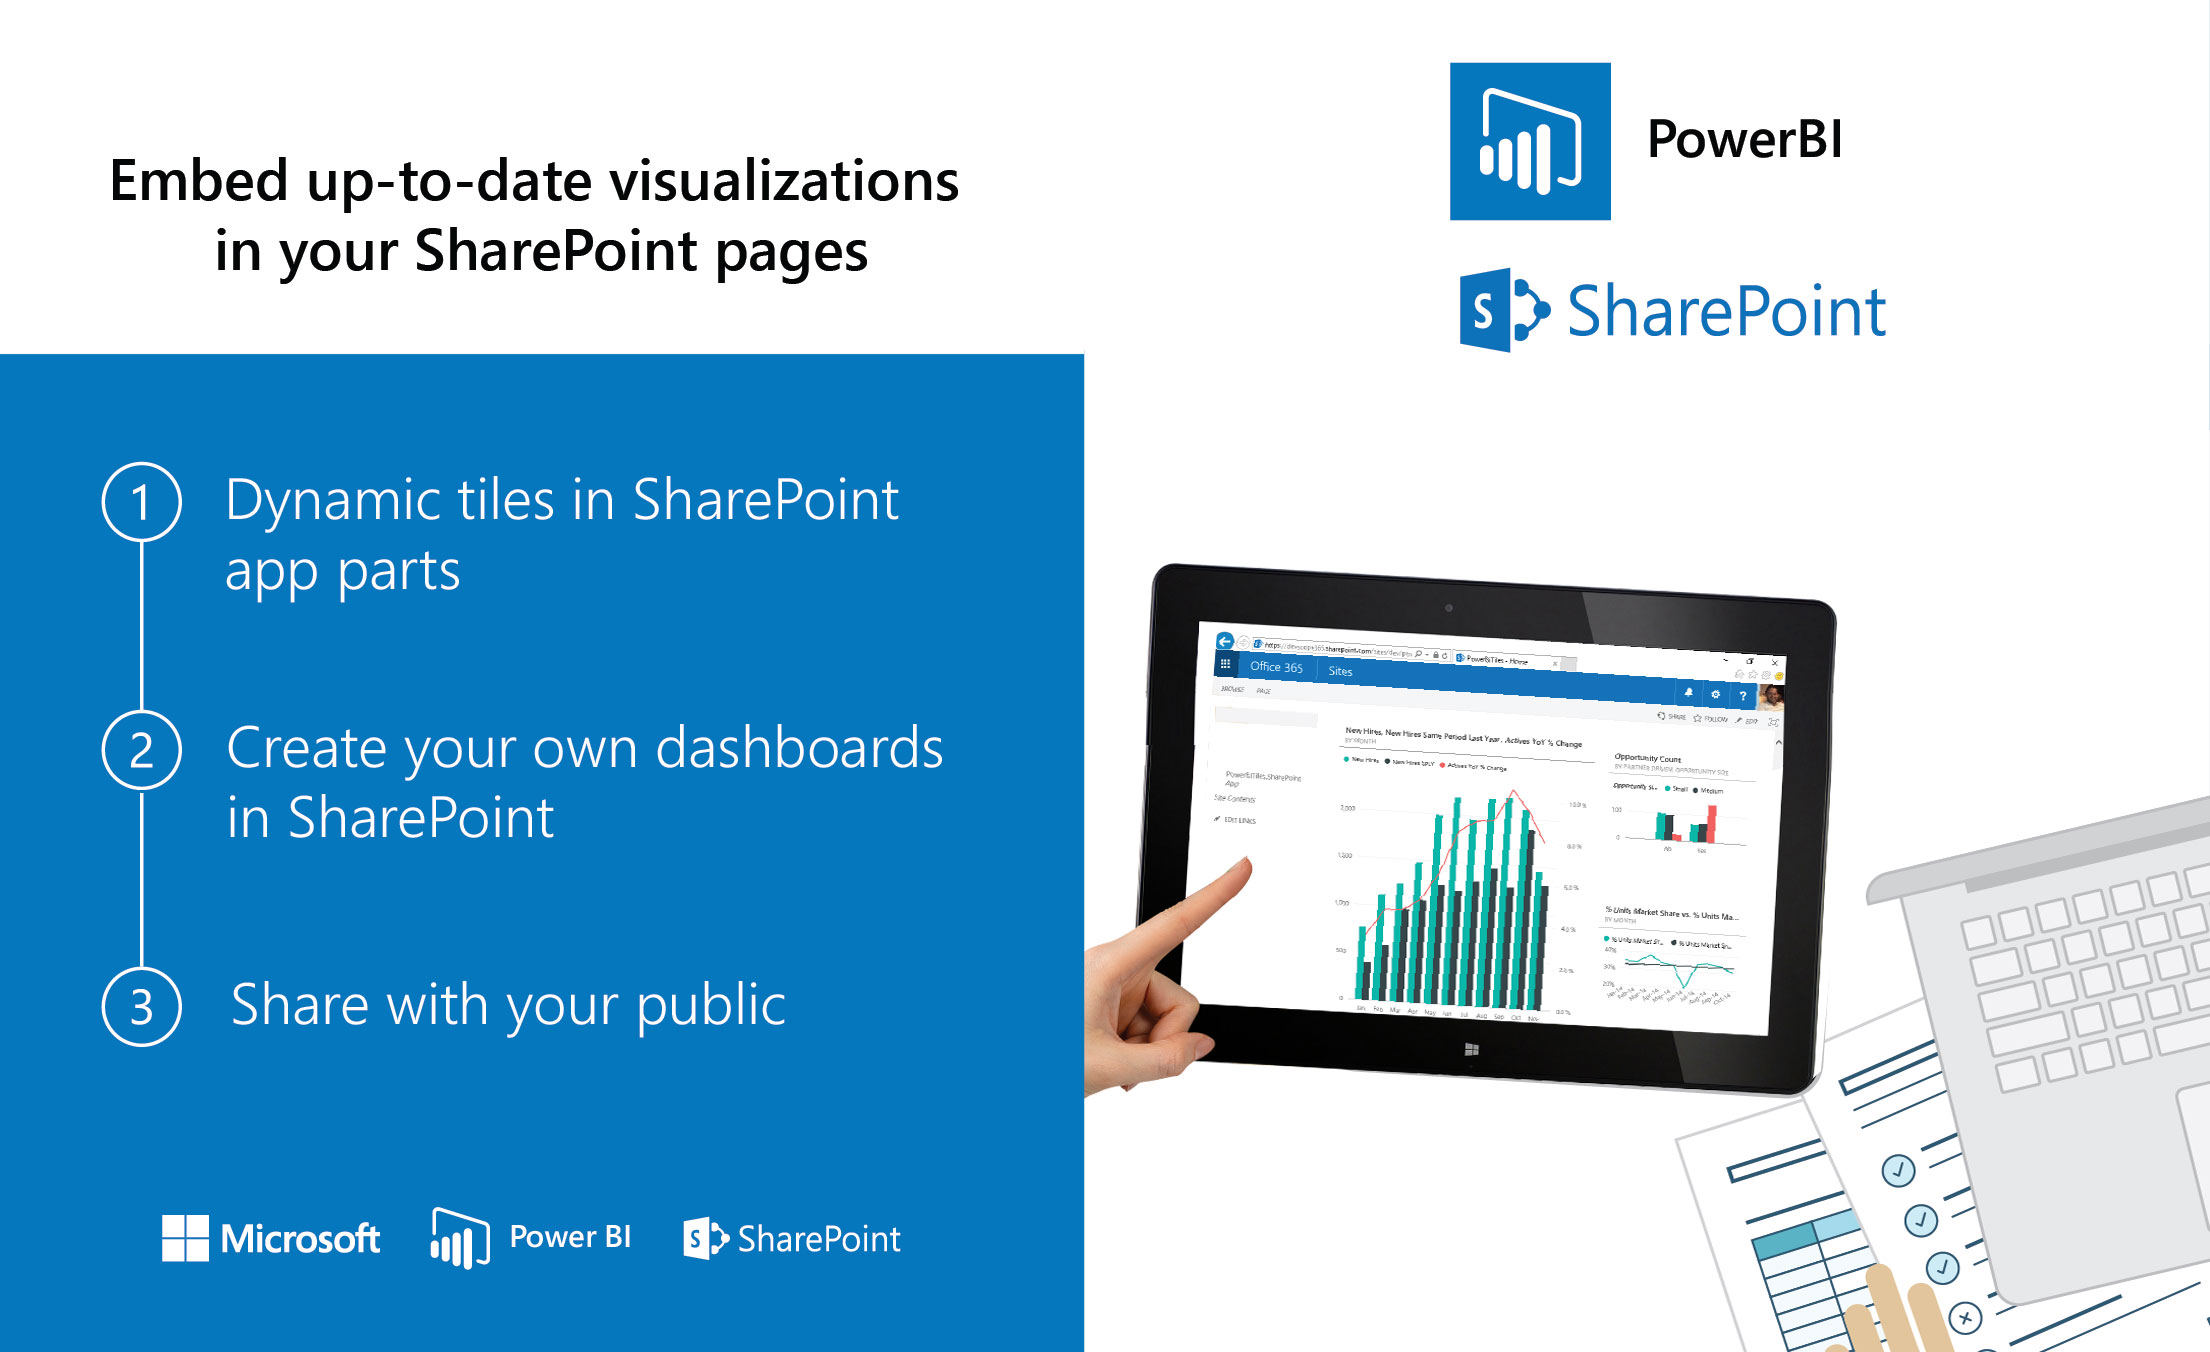 sharepoint Services, Solutions